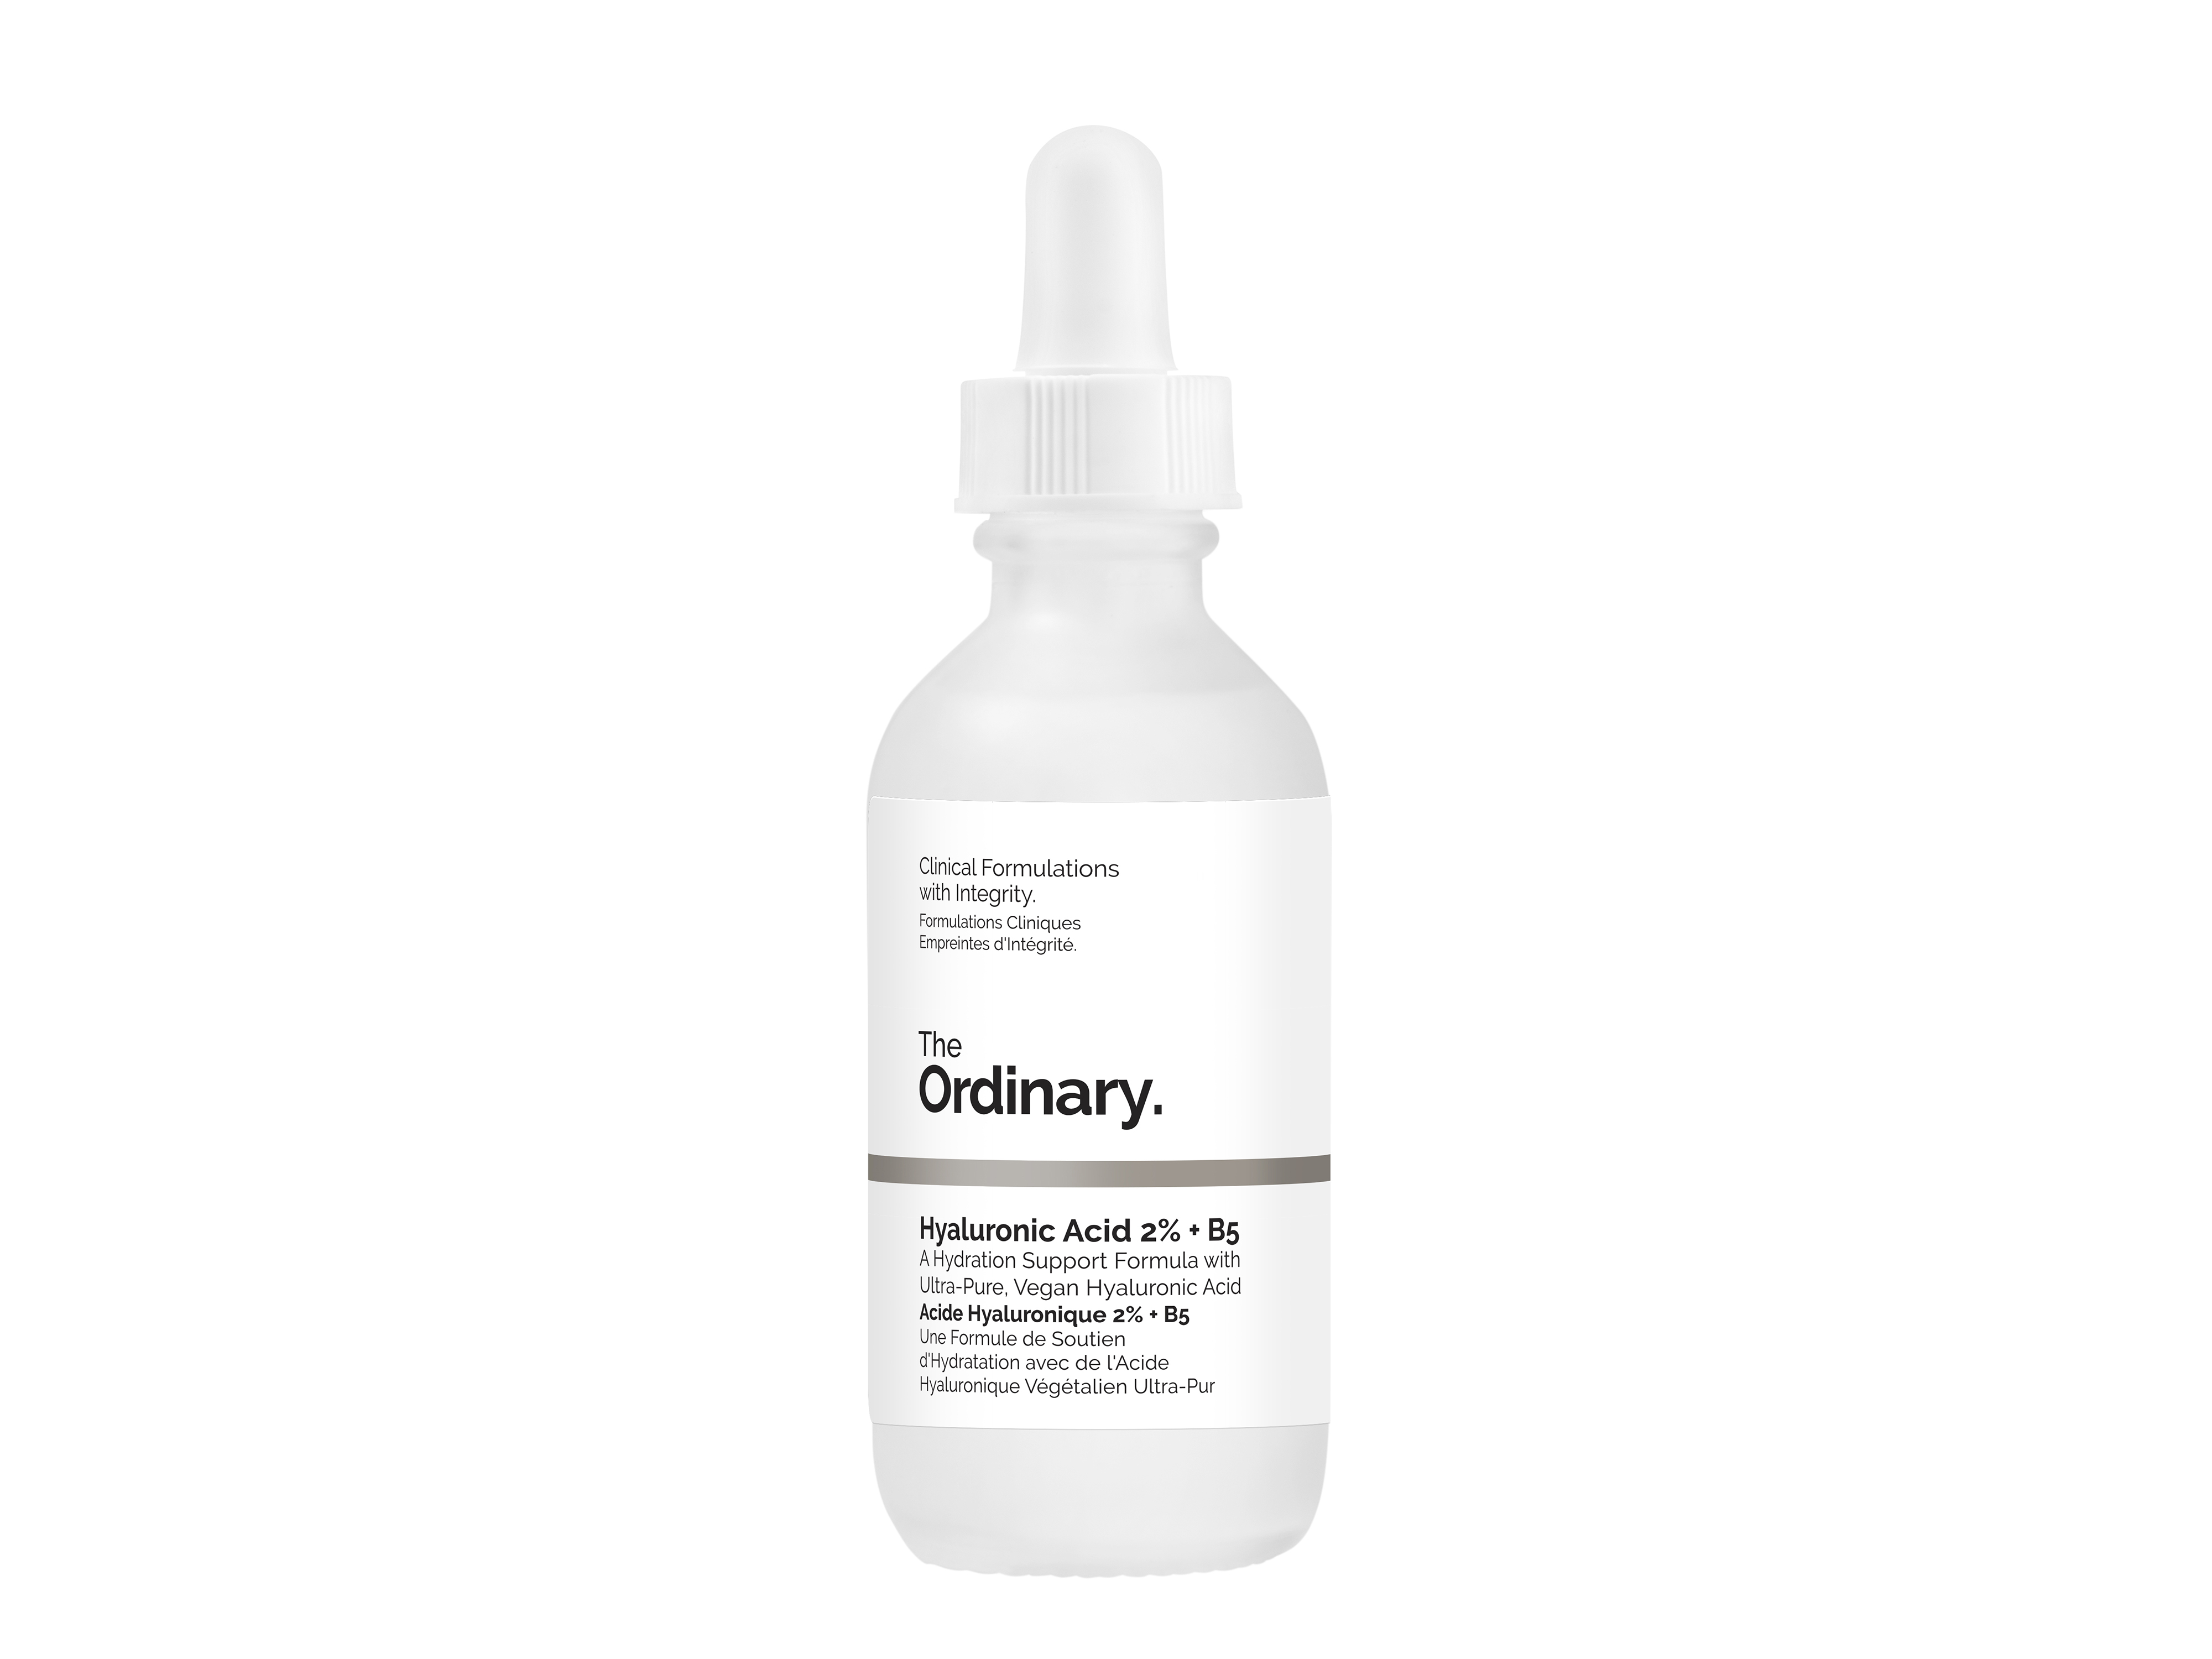 The Ordinary The Ordinary Hyaluronic Acid 2% + B5, 60 ml